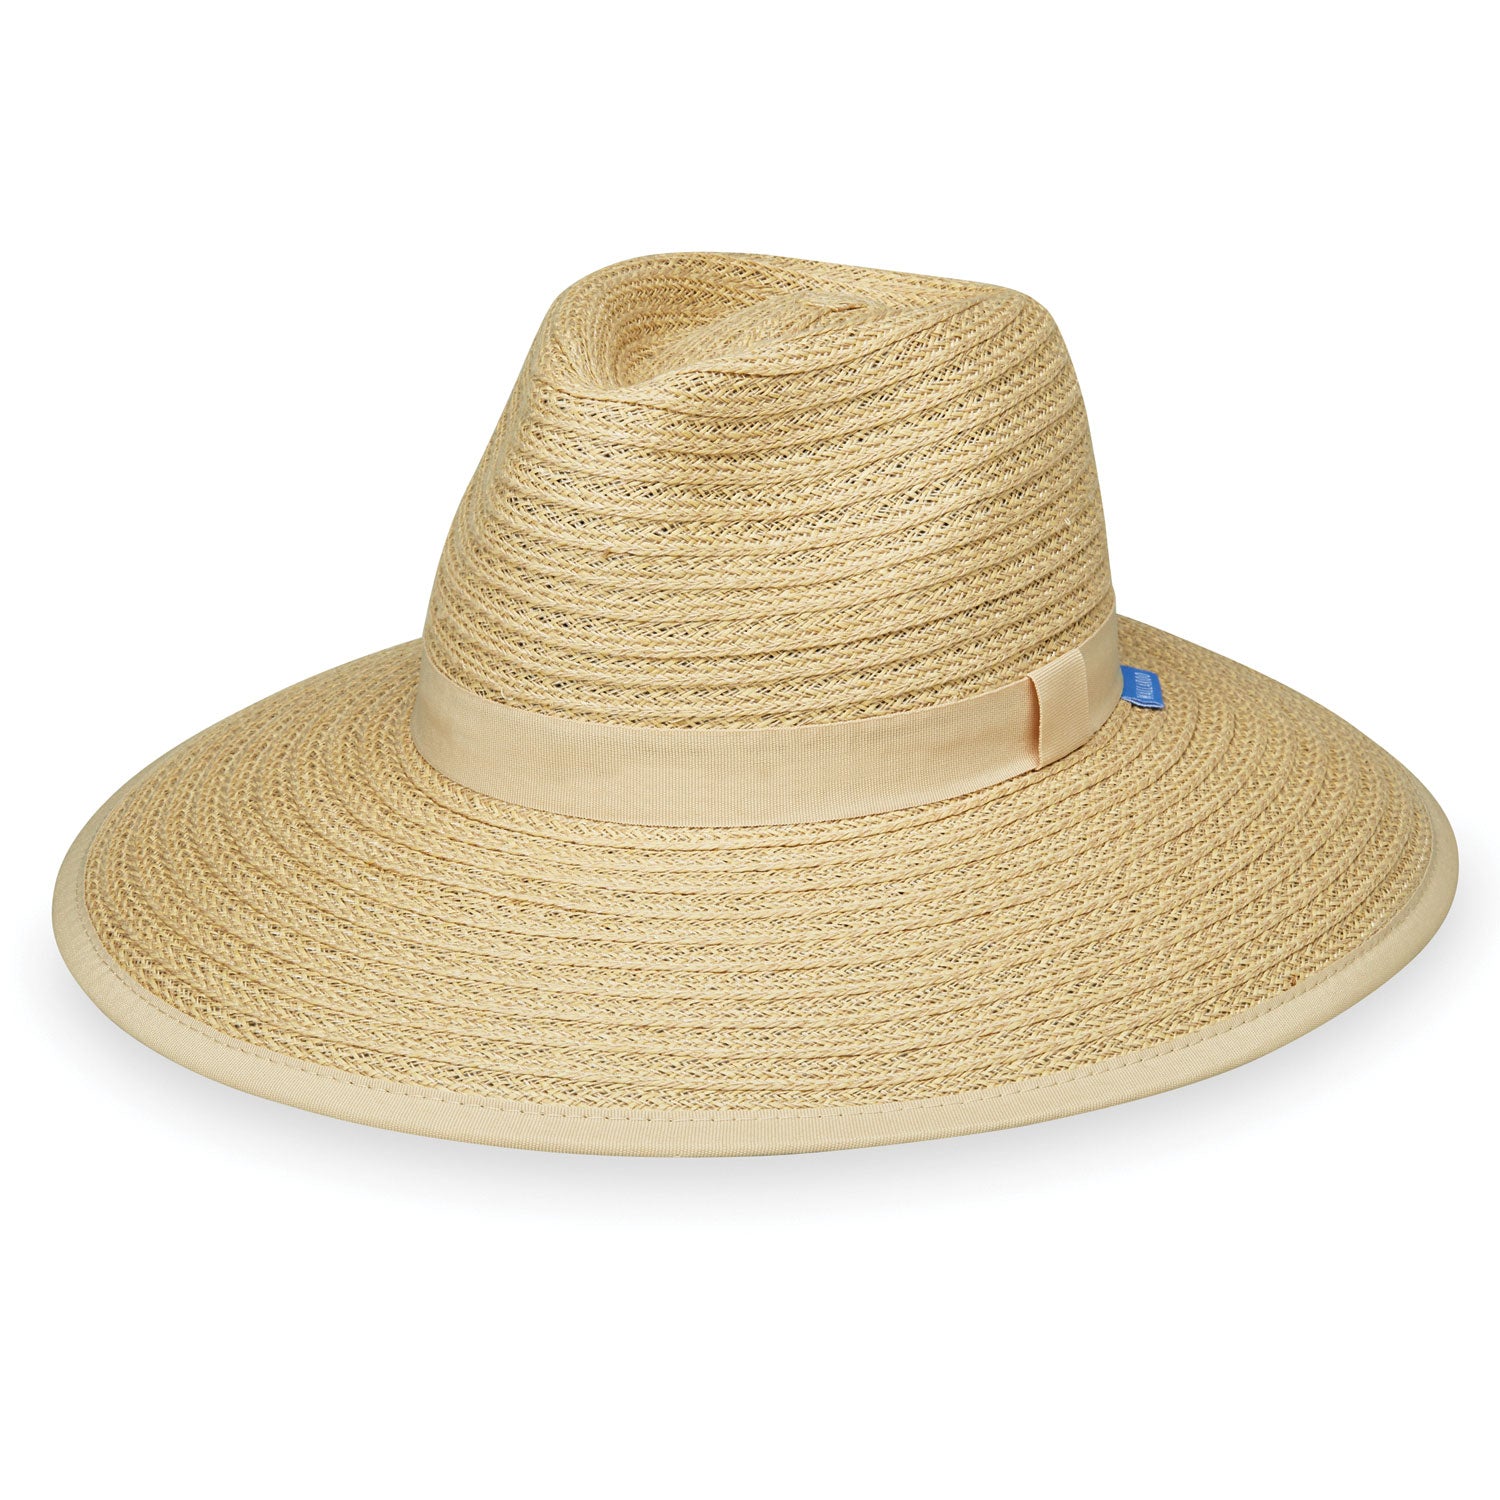 Featuring The Bali; a Packable Women's Wide Brim Fedora Style UPF sun hat from Wallaroo